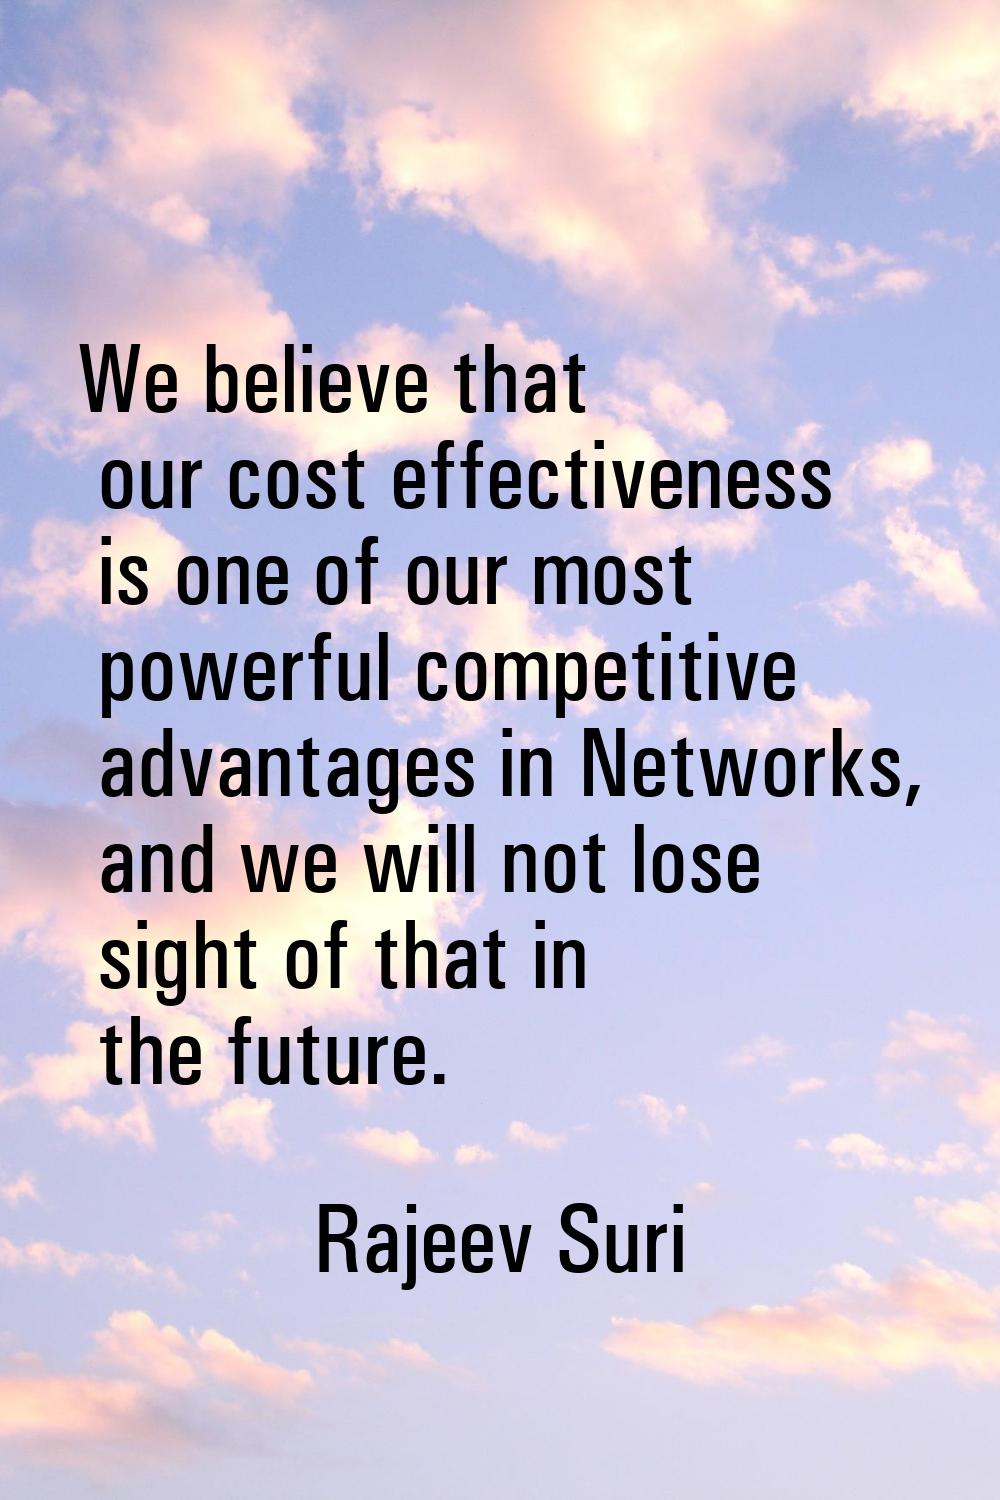 We believe that our cost effectiveness is one of our most powerful competitive advantages in Networ